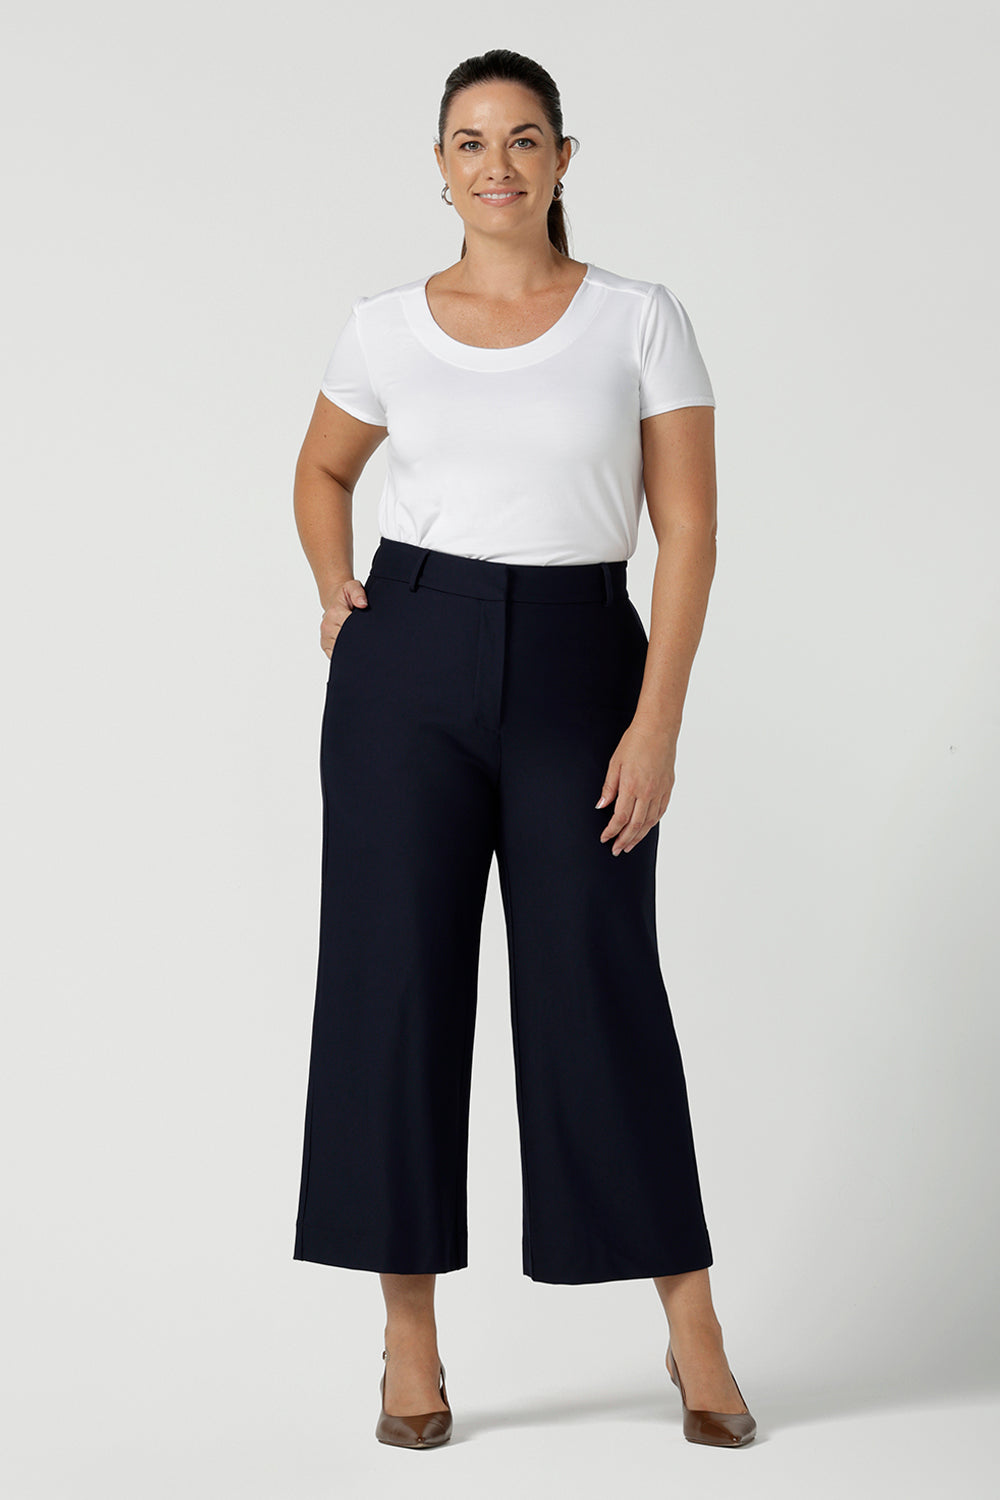 Yael Pant in Navy Ponte. Tailored high waist pants with pockets and front zip. Cropped culotte length and styled back with white bamboo top. Made in Australia for women size 8 - 24.